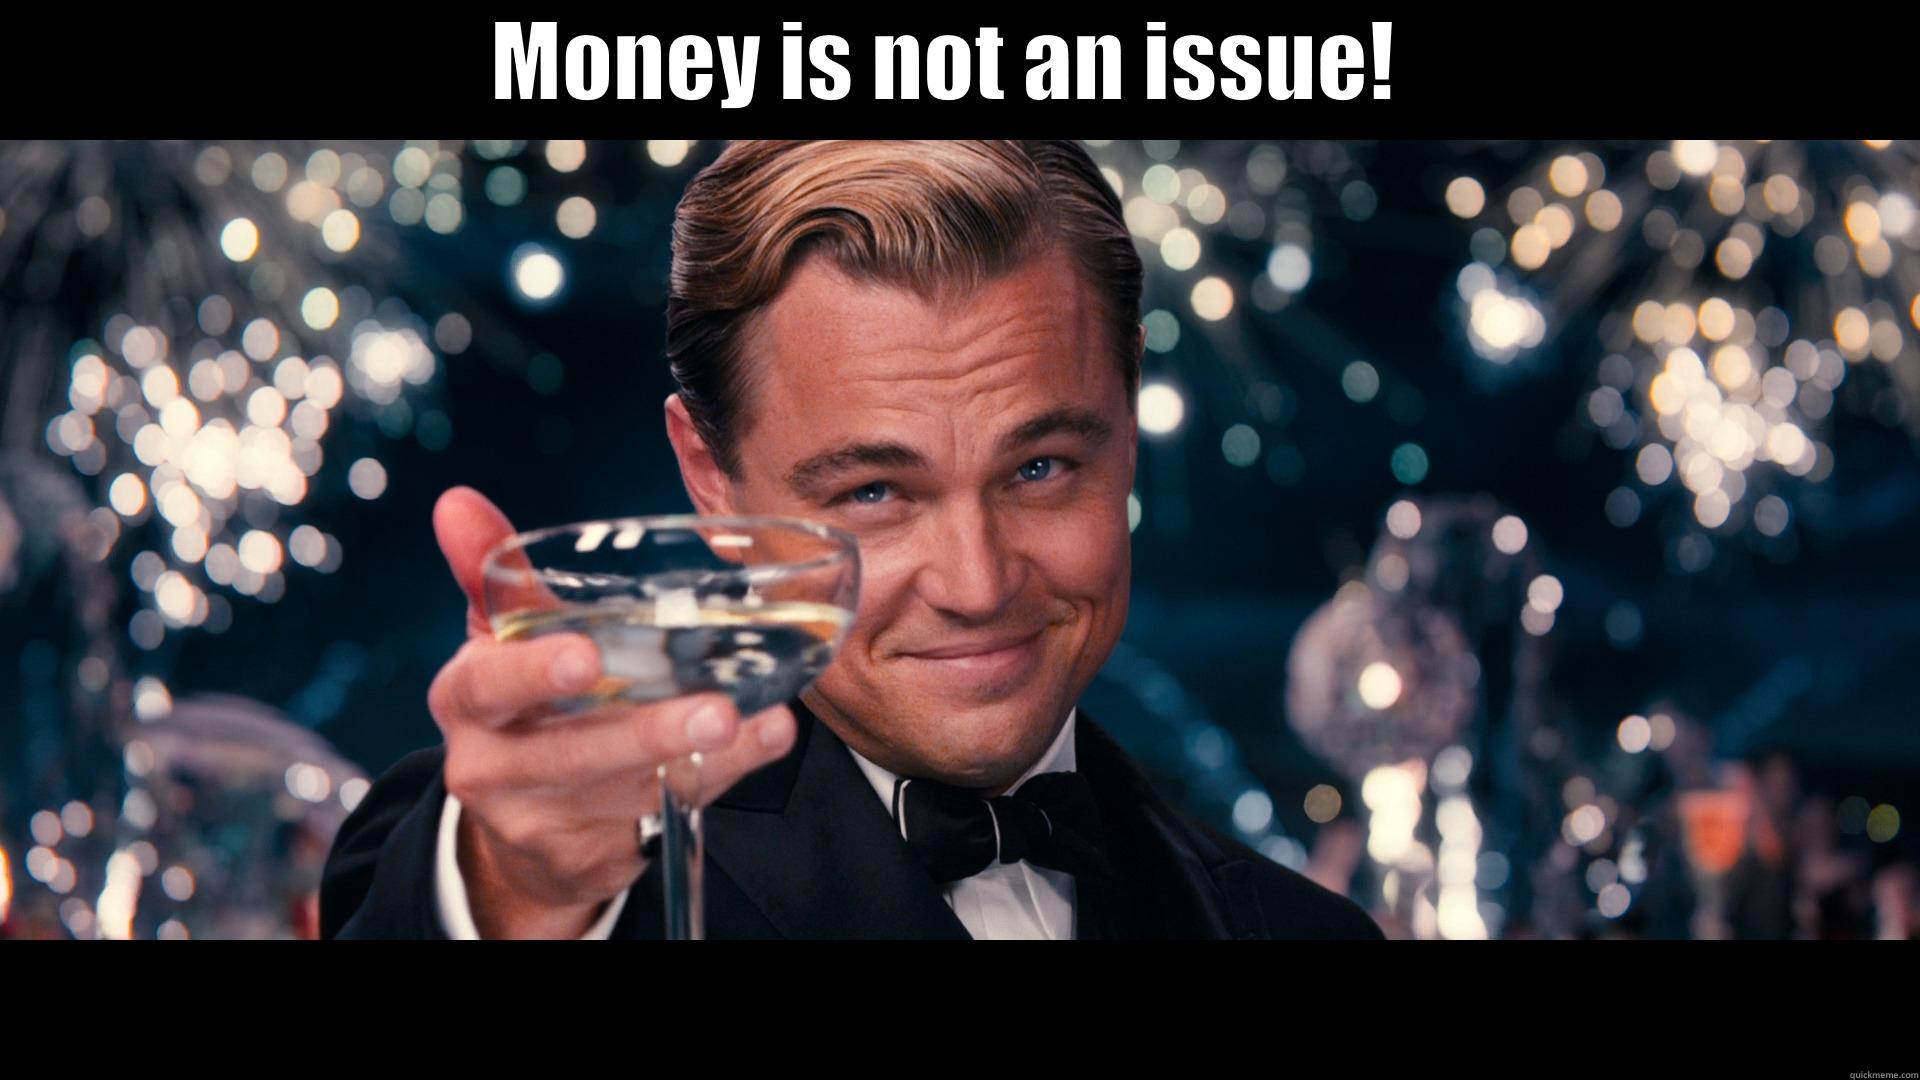 Money Issues - MONEY IS NOT AN ISSUE!   Misc